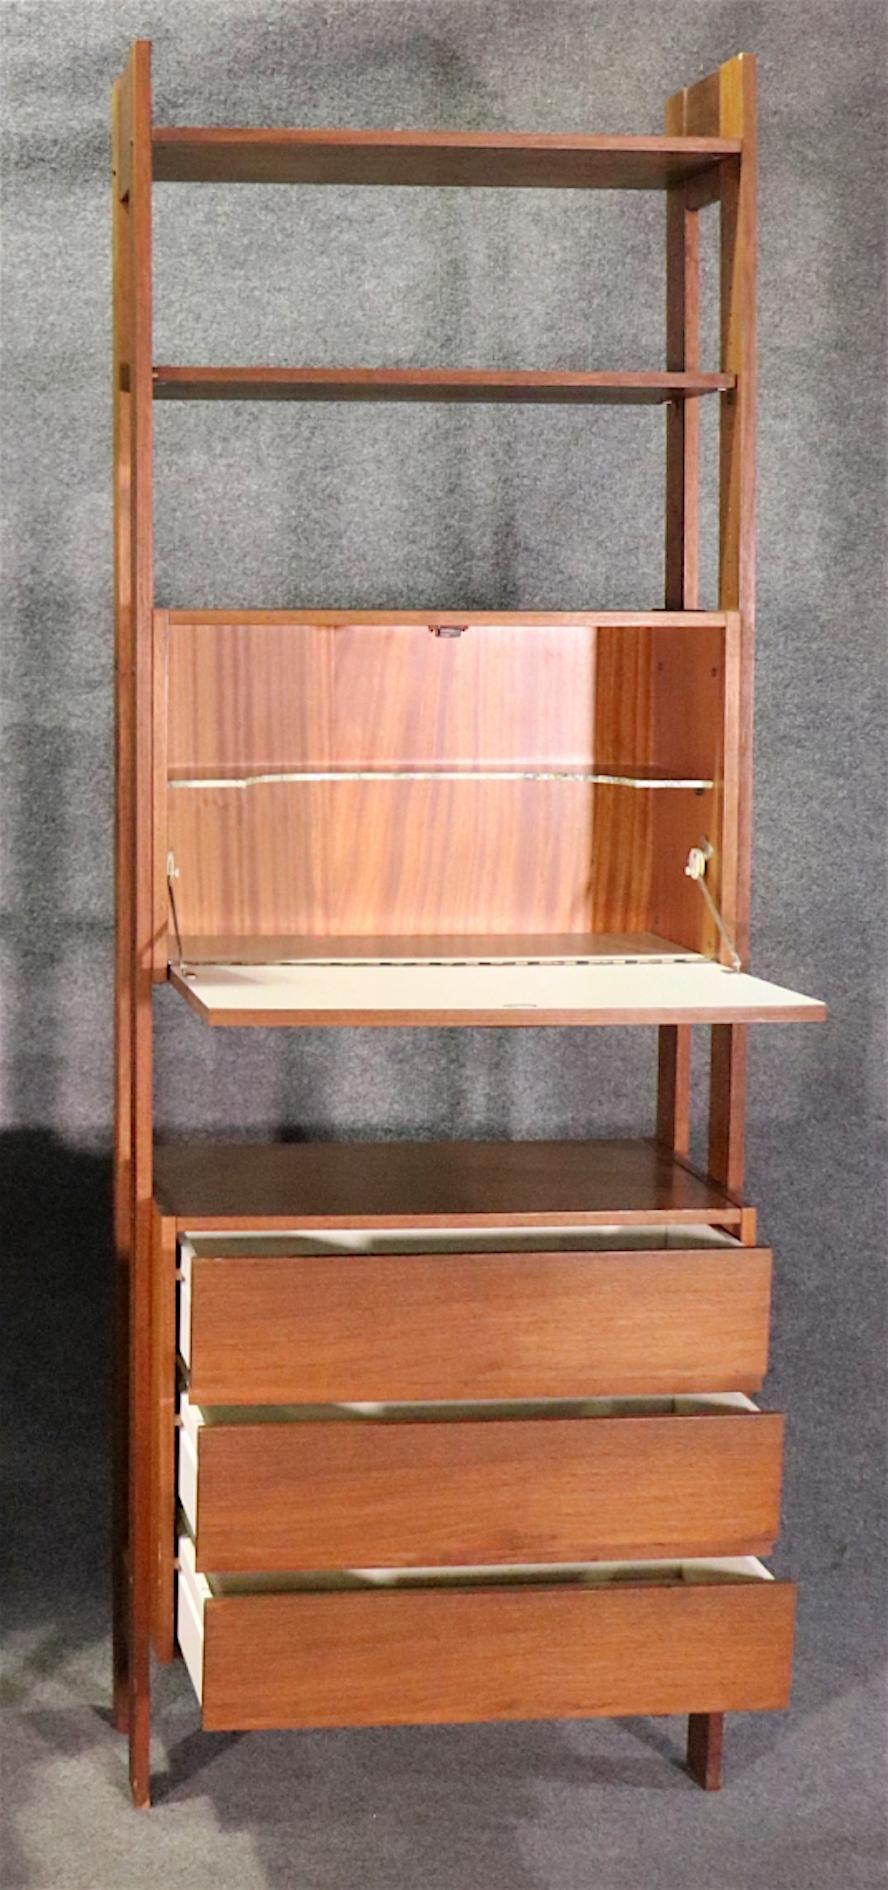 This mid-century modern standing bookcase features adjustable shelves, drawers, and drop front cabinet storage.
Please confirm location NY or NJ